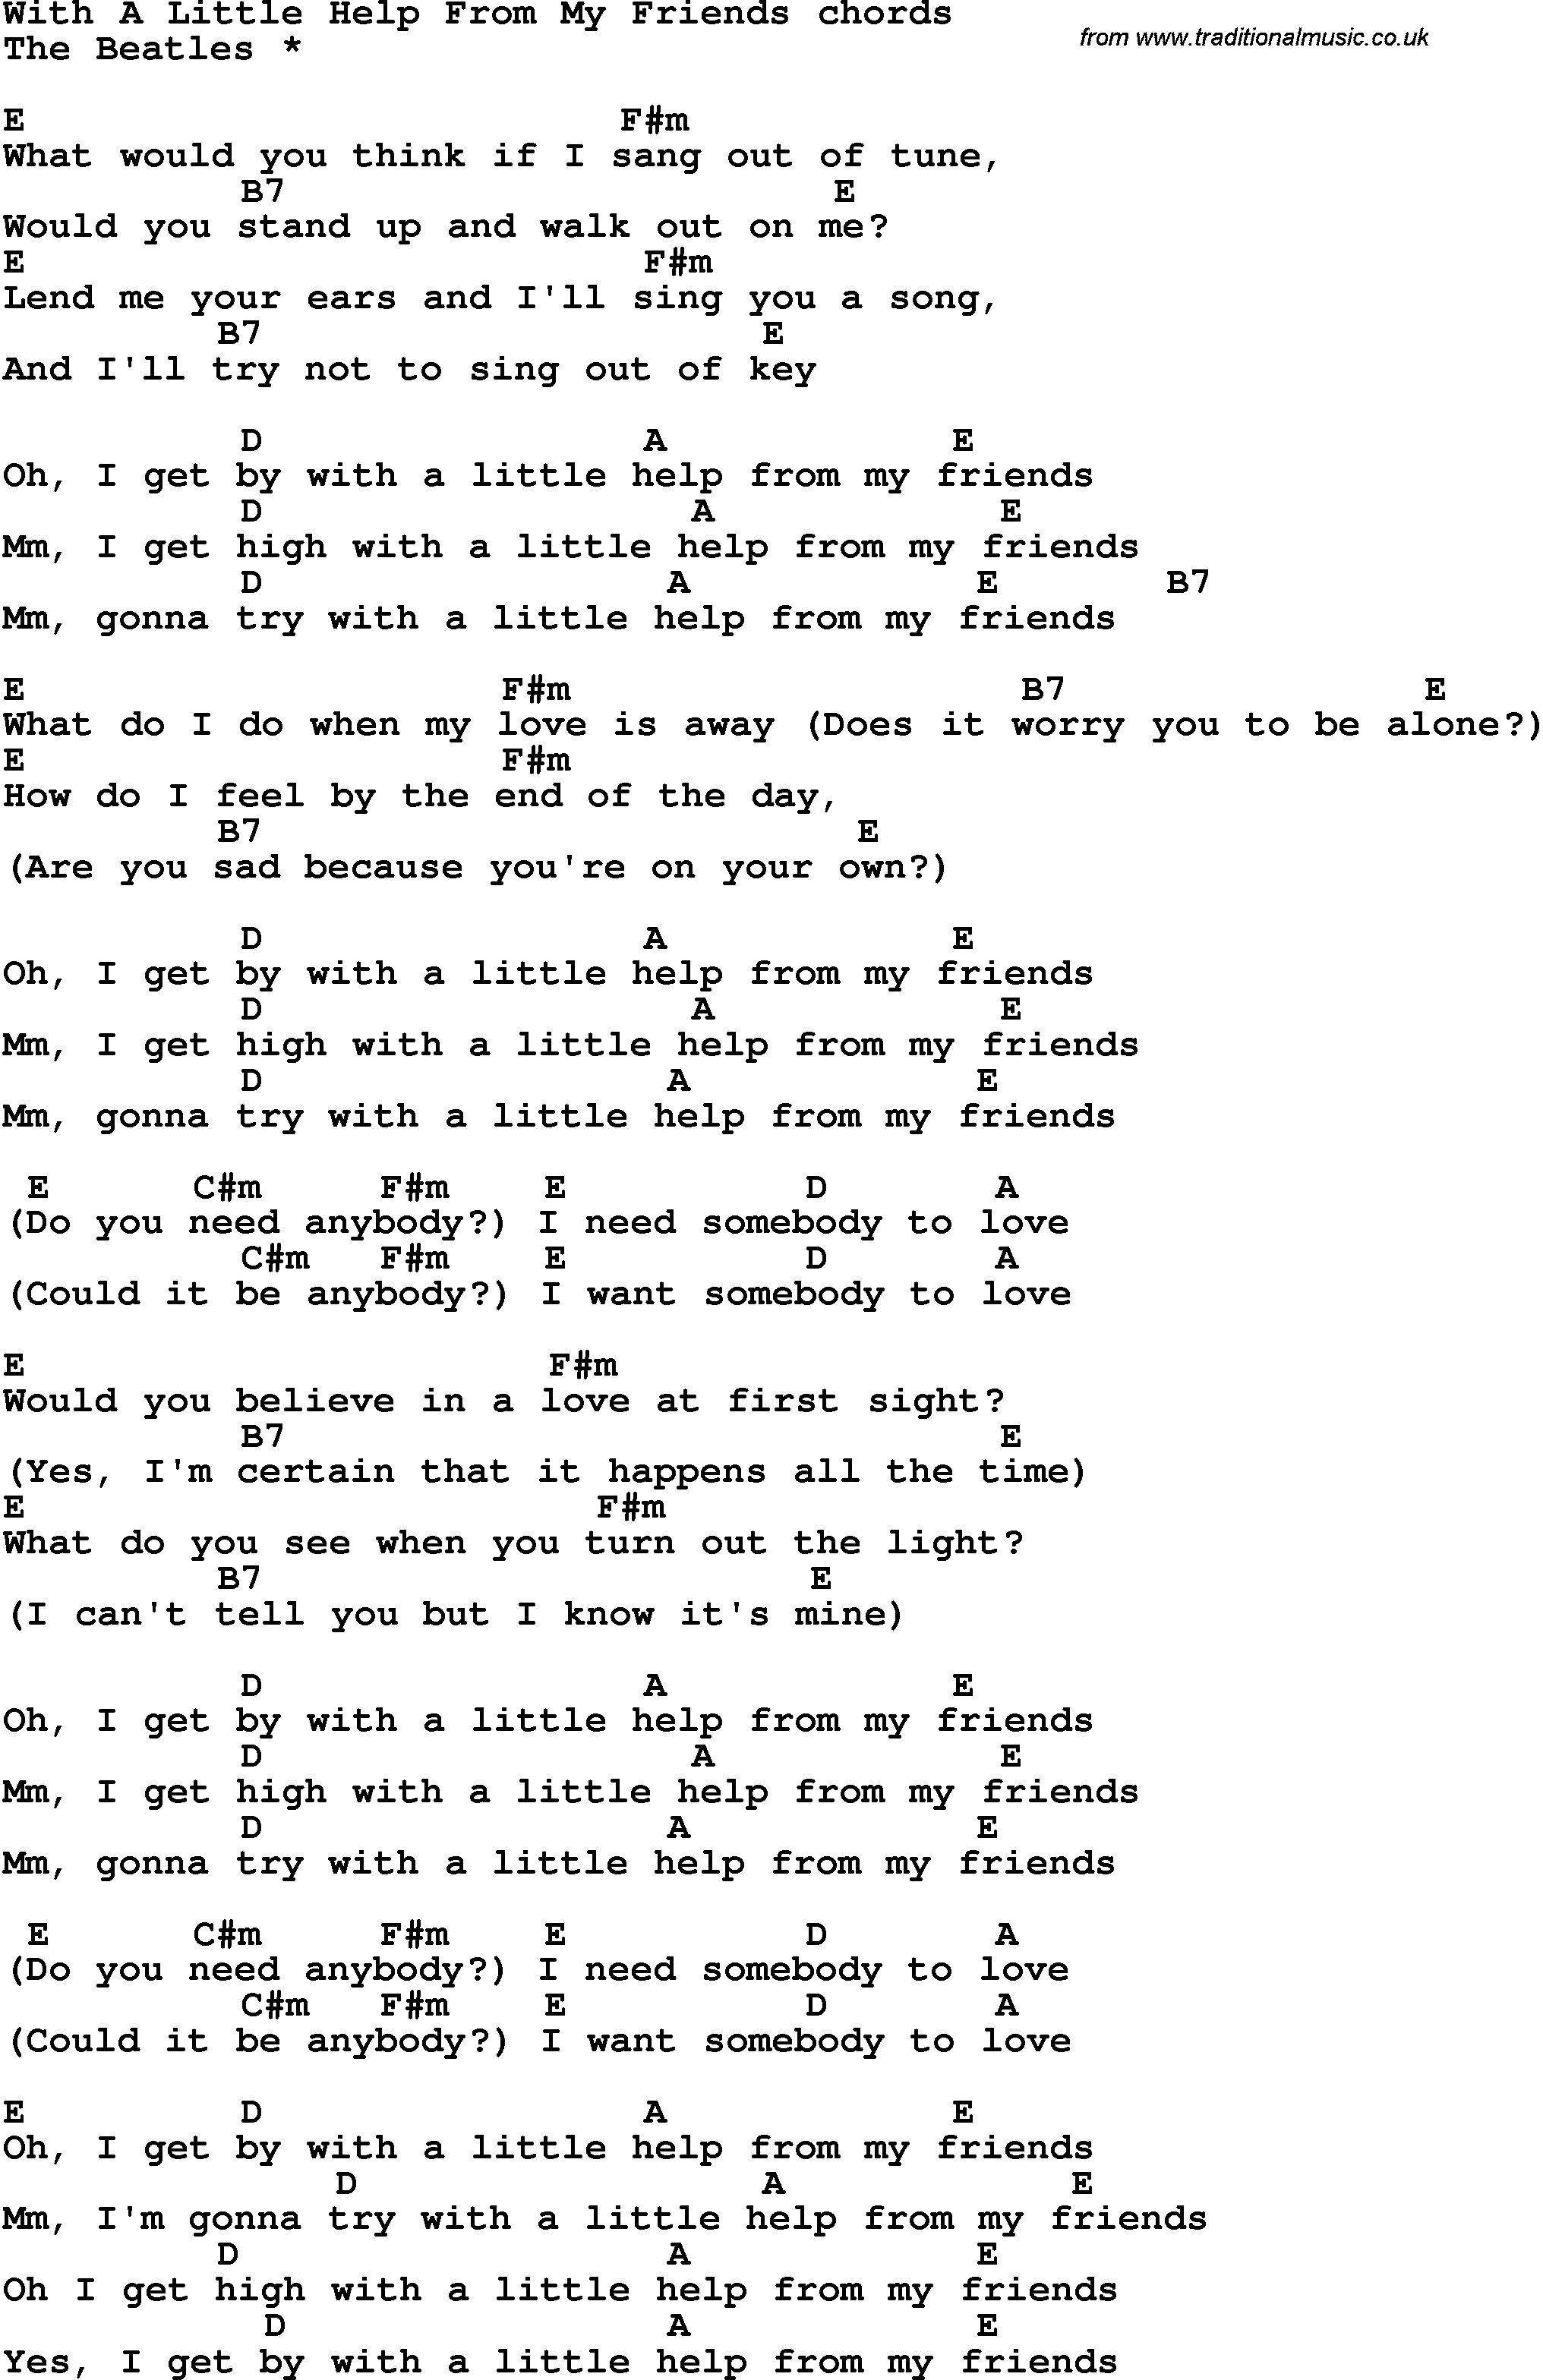 Song Lyrics with guitar chords for With A Little Help From My Friends